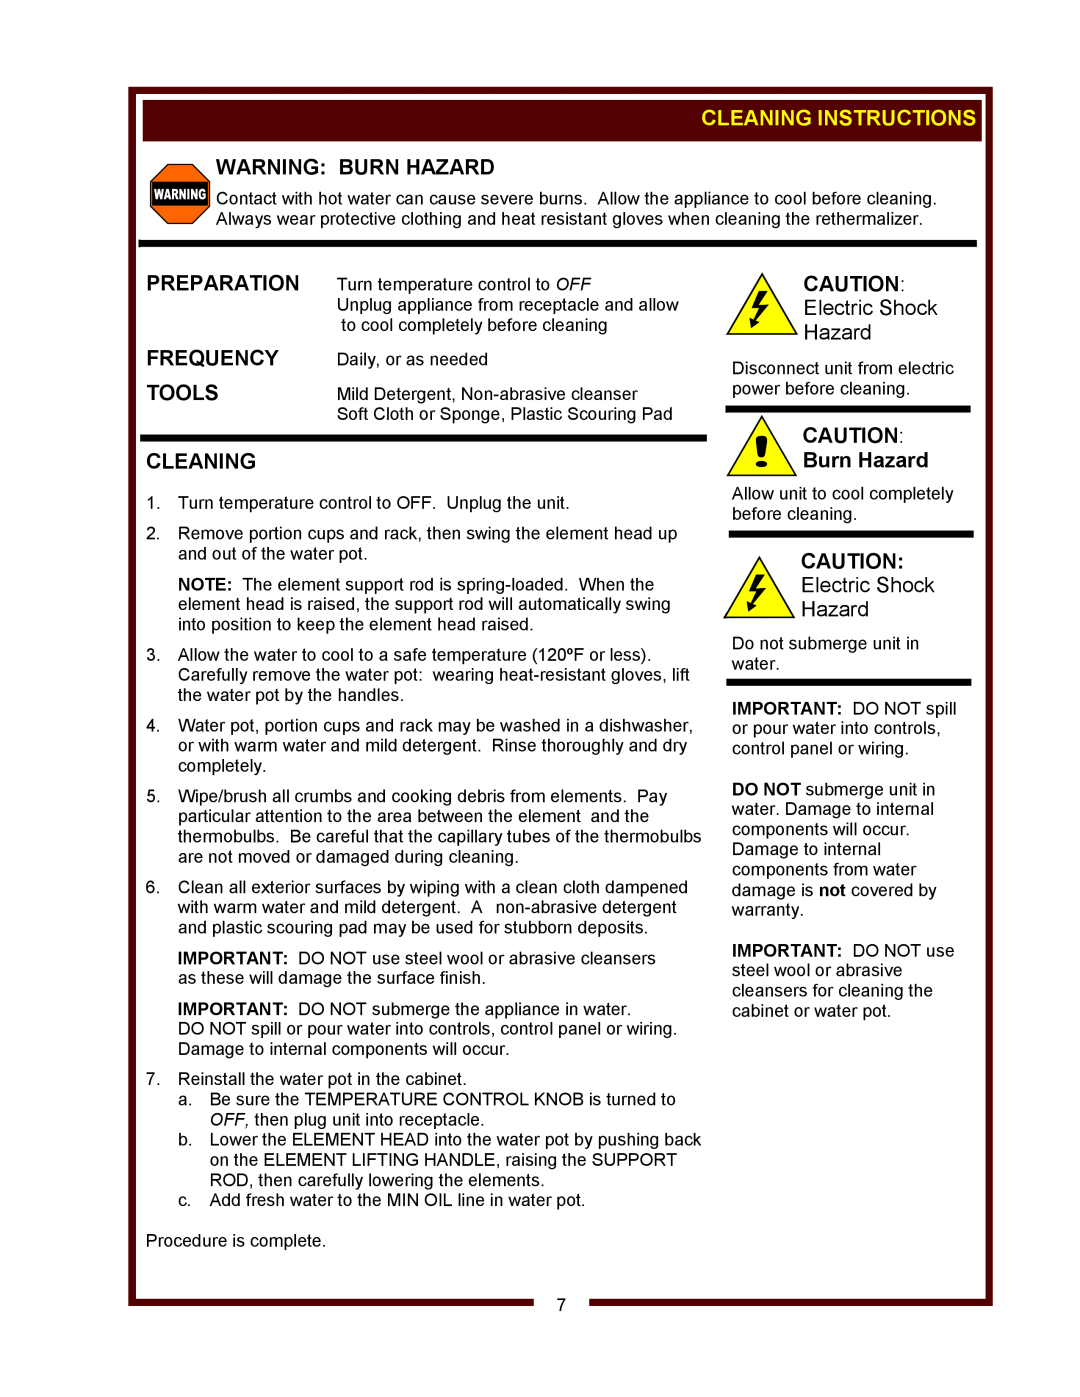 Wells F-49RT operation manual Cleaning Instructions, Preparation, Frequency, Tools, Warning Burn Hazard 